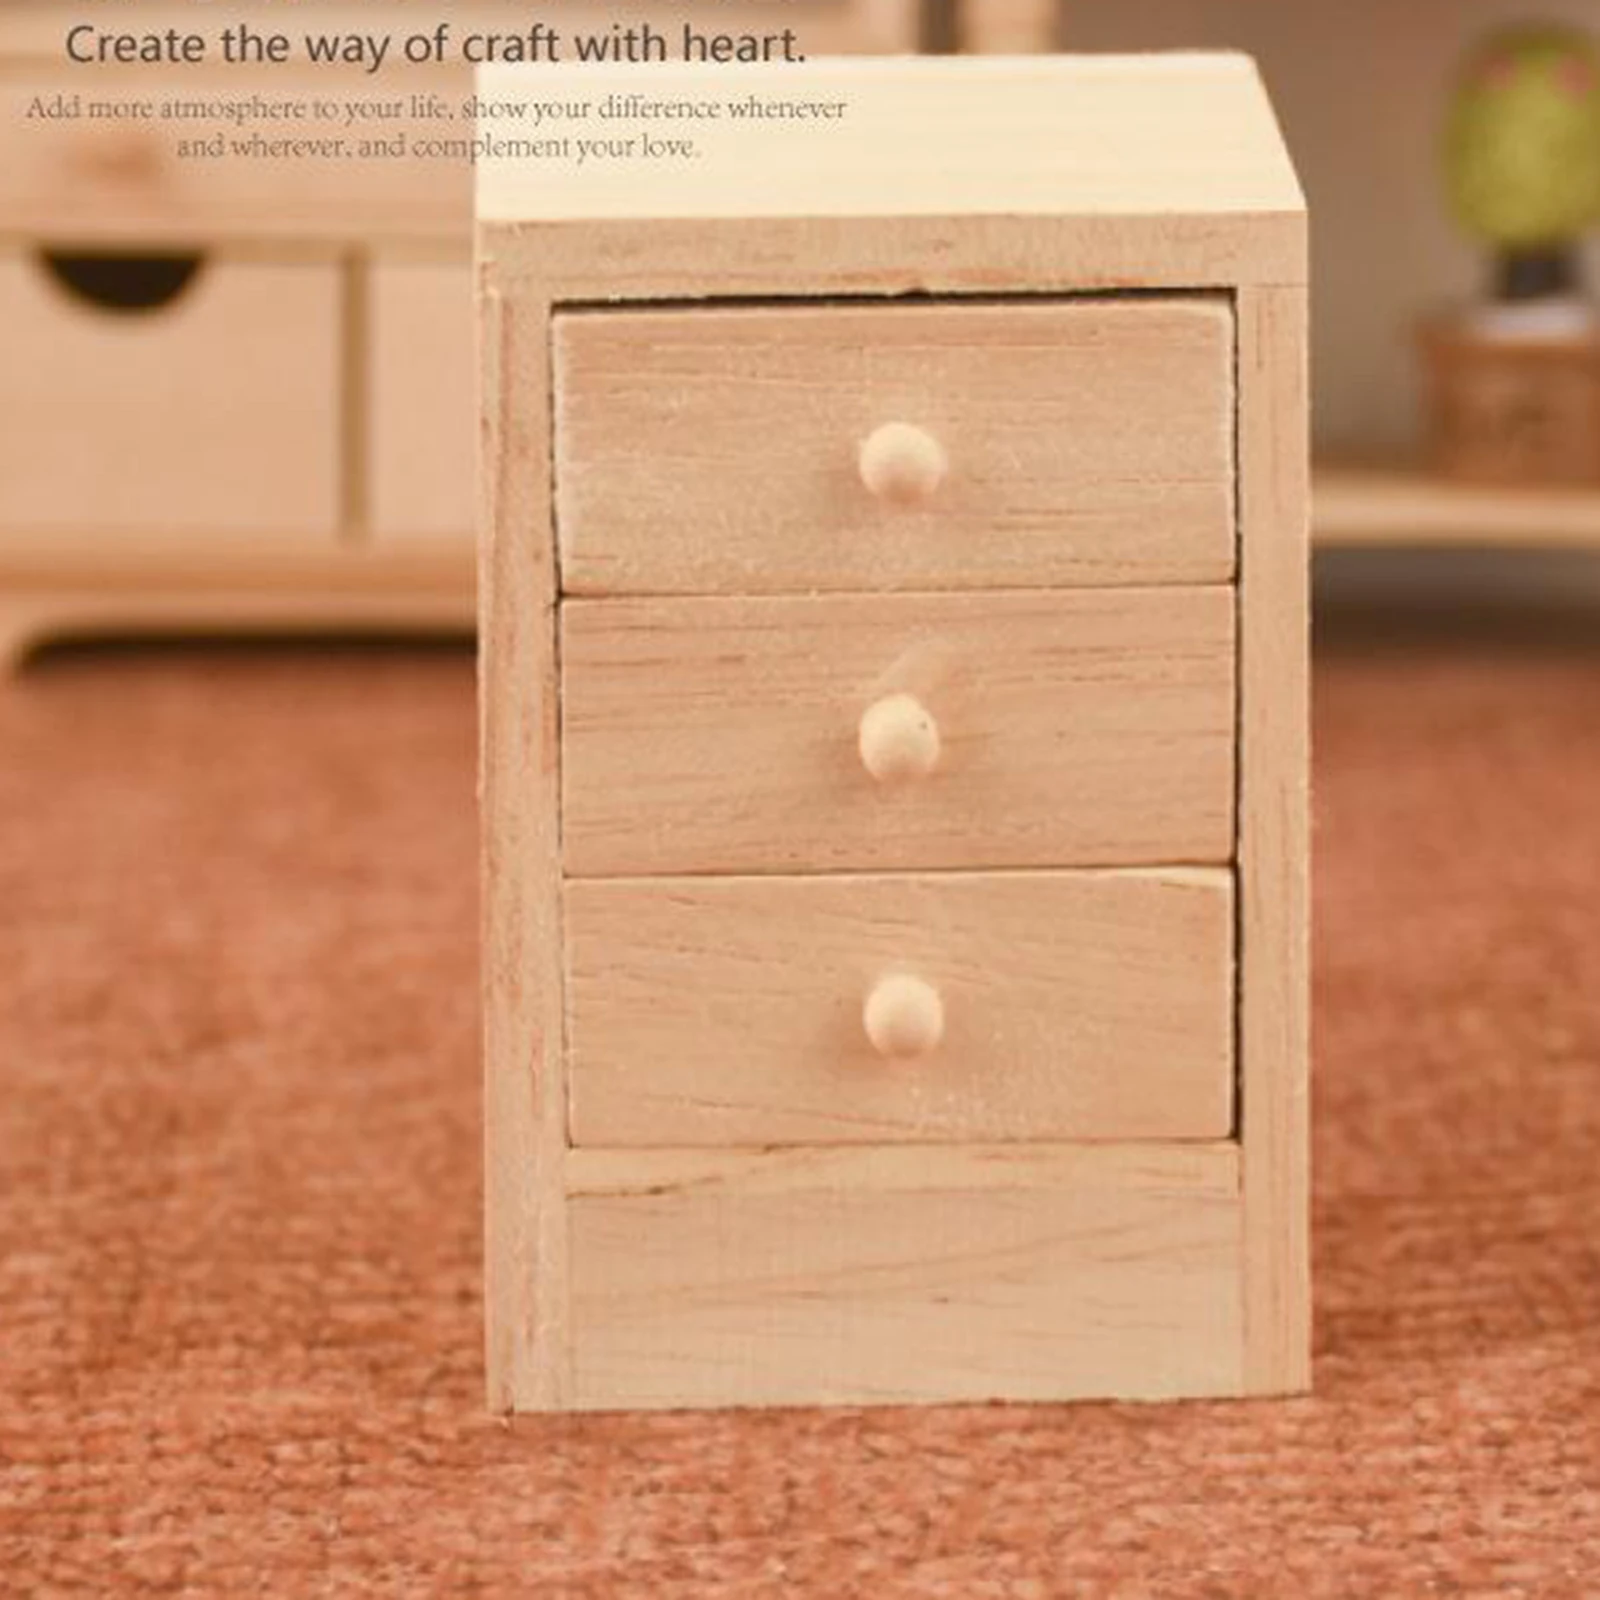 1:12 Scale Doll House Miniature Wood Bedside Cupboard,Simulation Model Baby Doll Bedroom Furniture Supplies,Scenery Ornaments